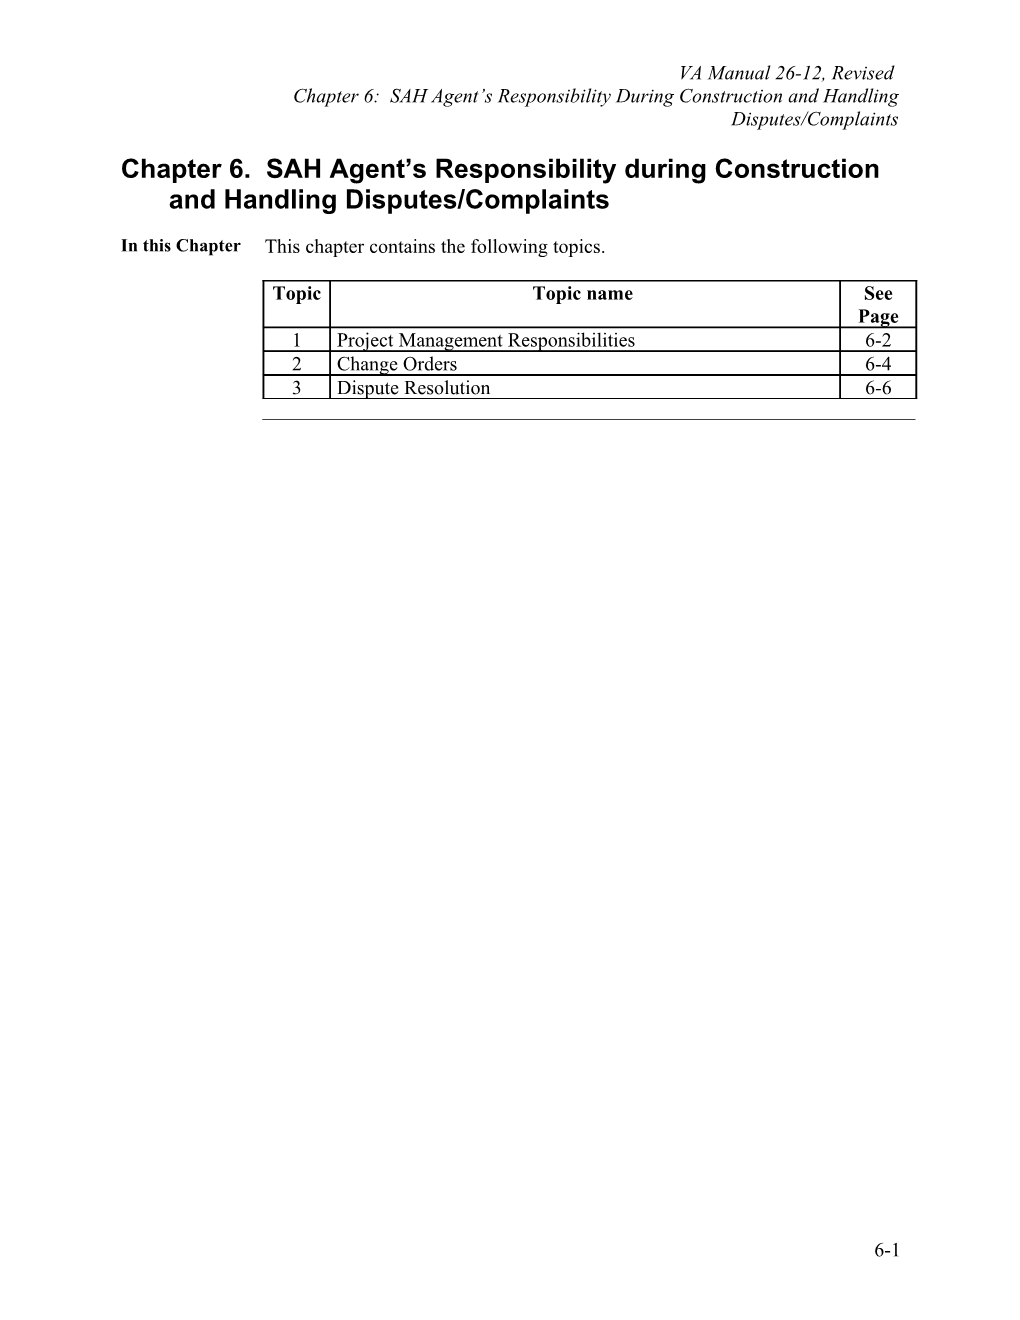 Chapter 6. SAH Agent S Responsibility During Construction and Handling Disputes/Complaints